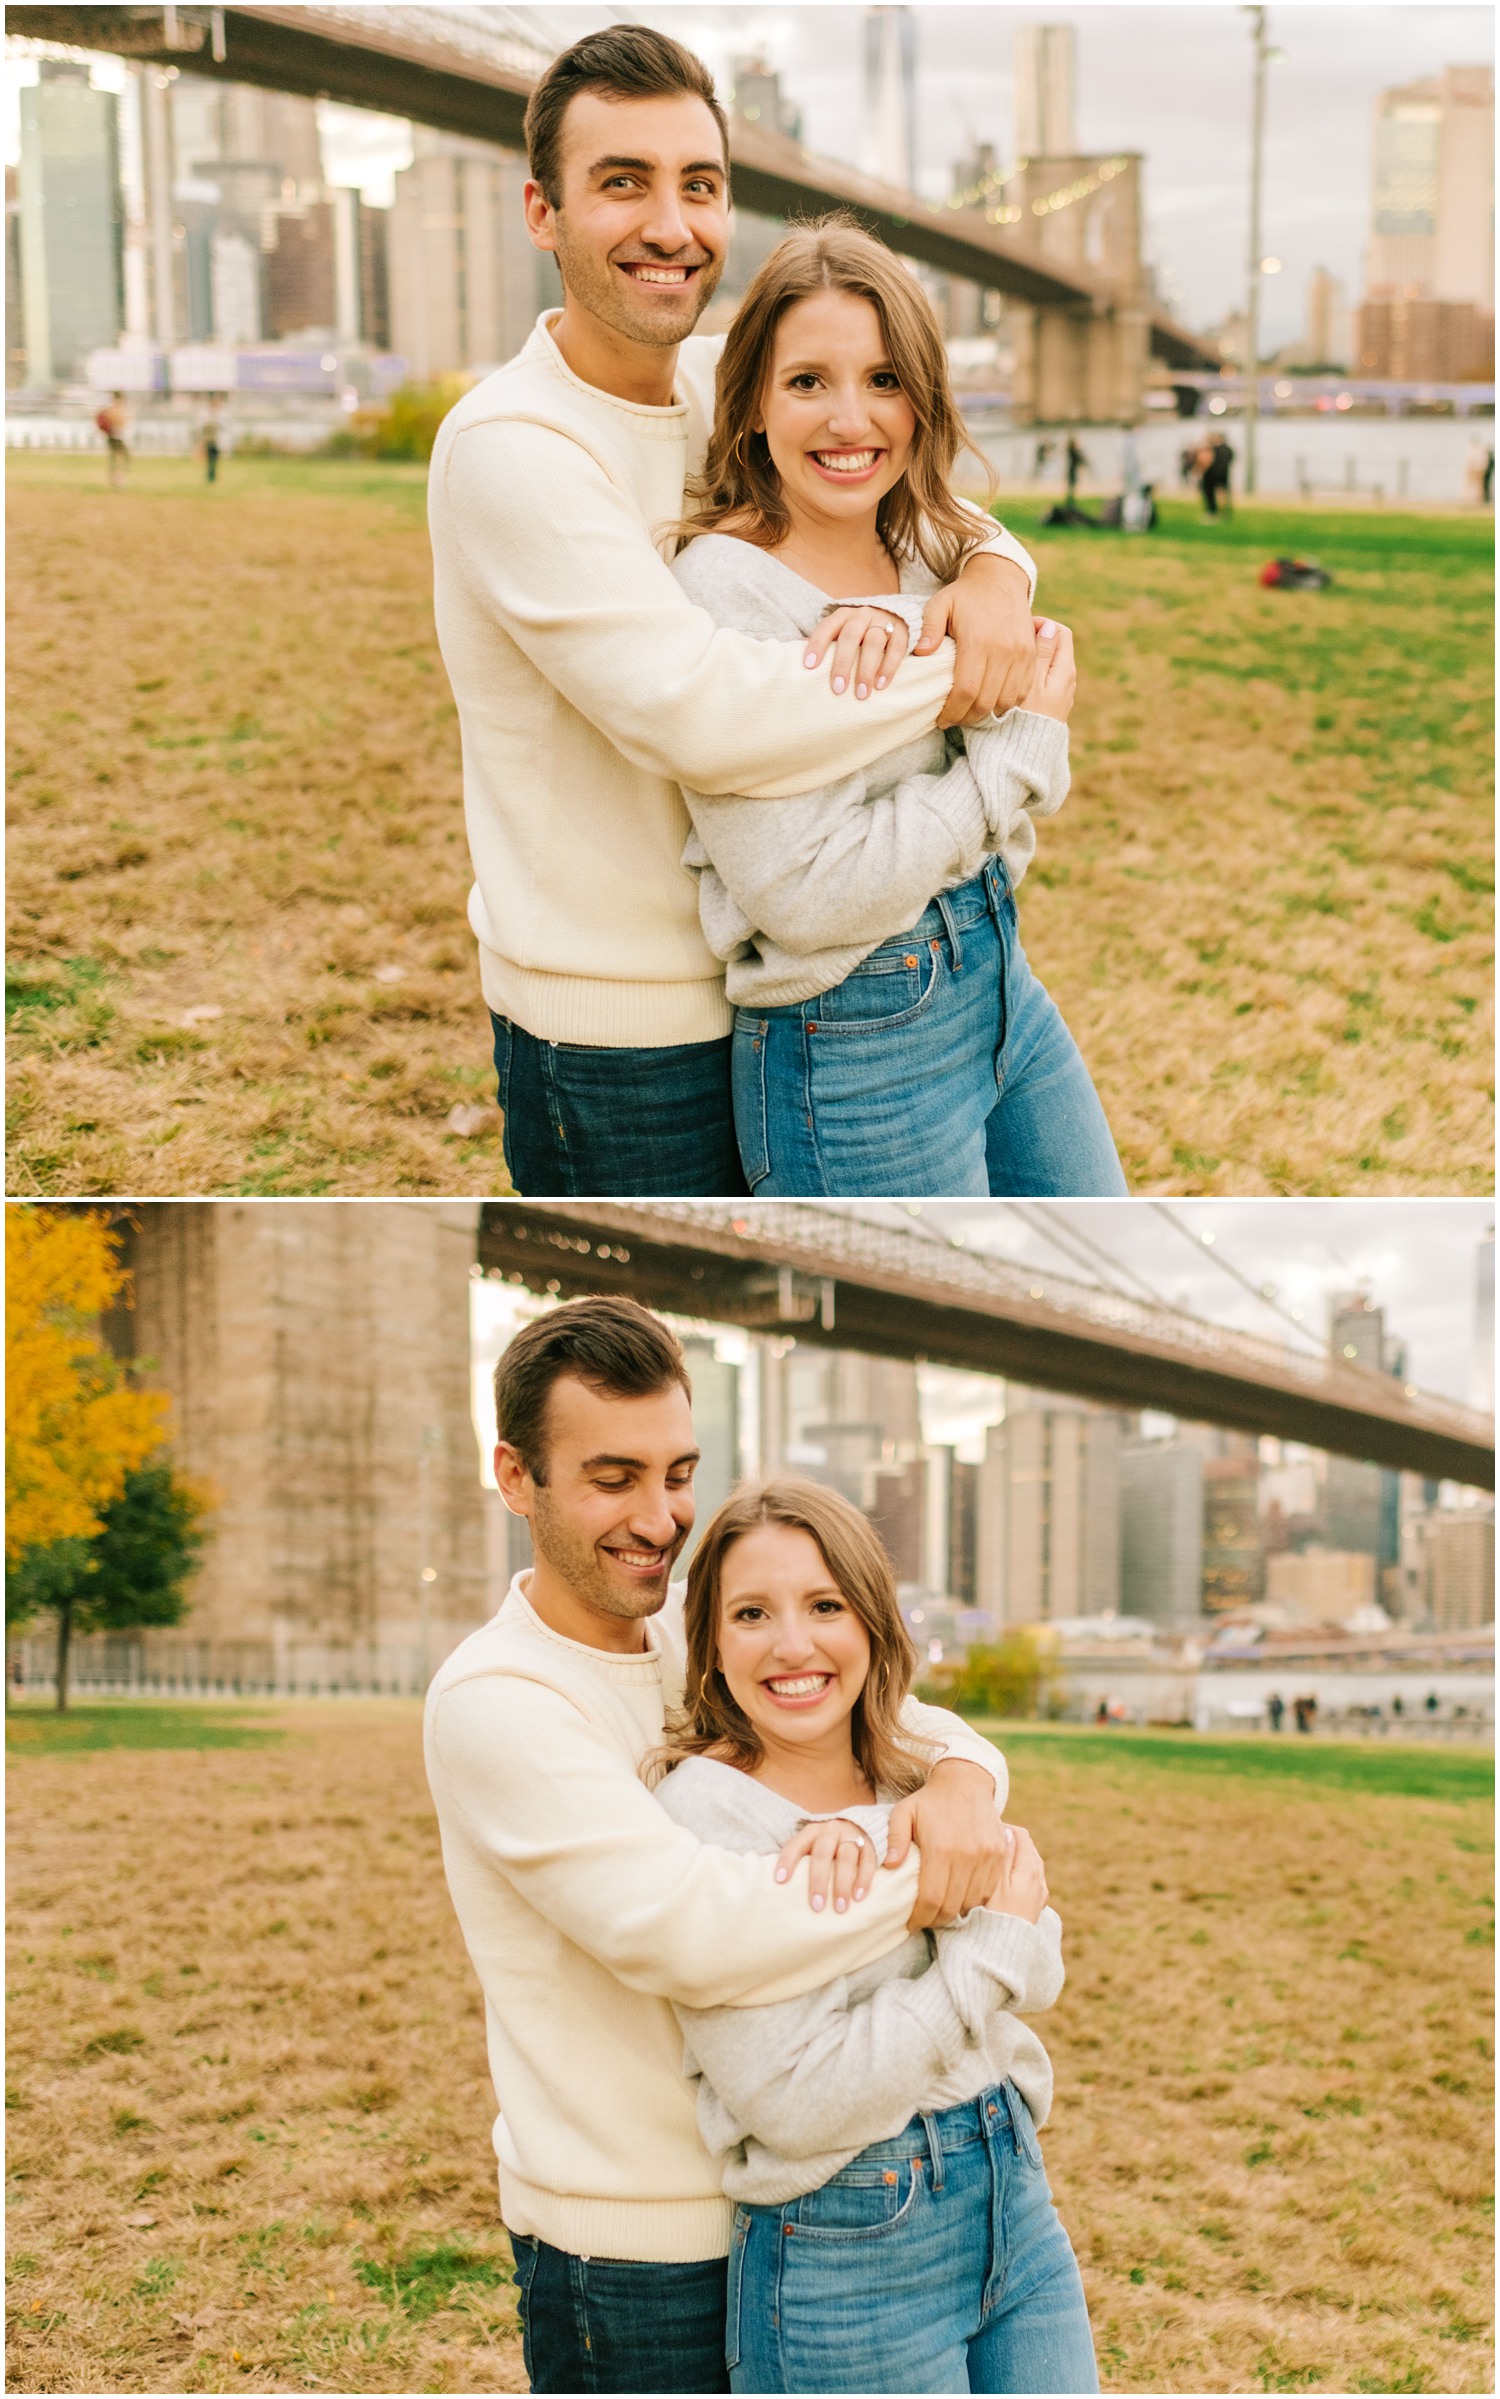 casual fall engagement photos in sweatshirts and jeans during West Village & Dumbo engagement session